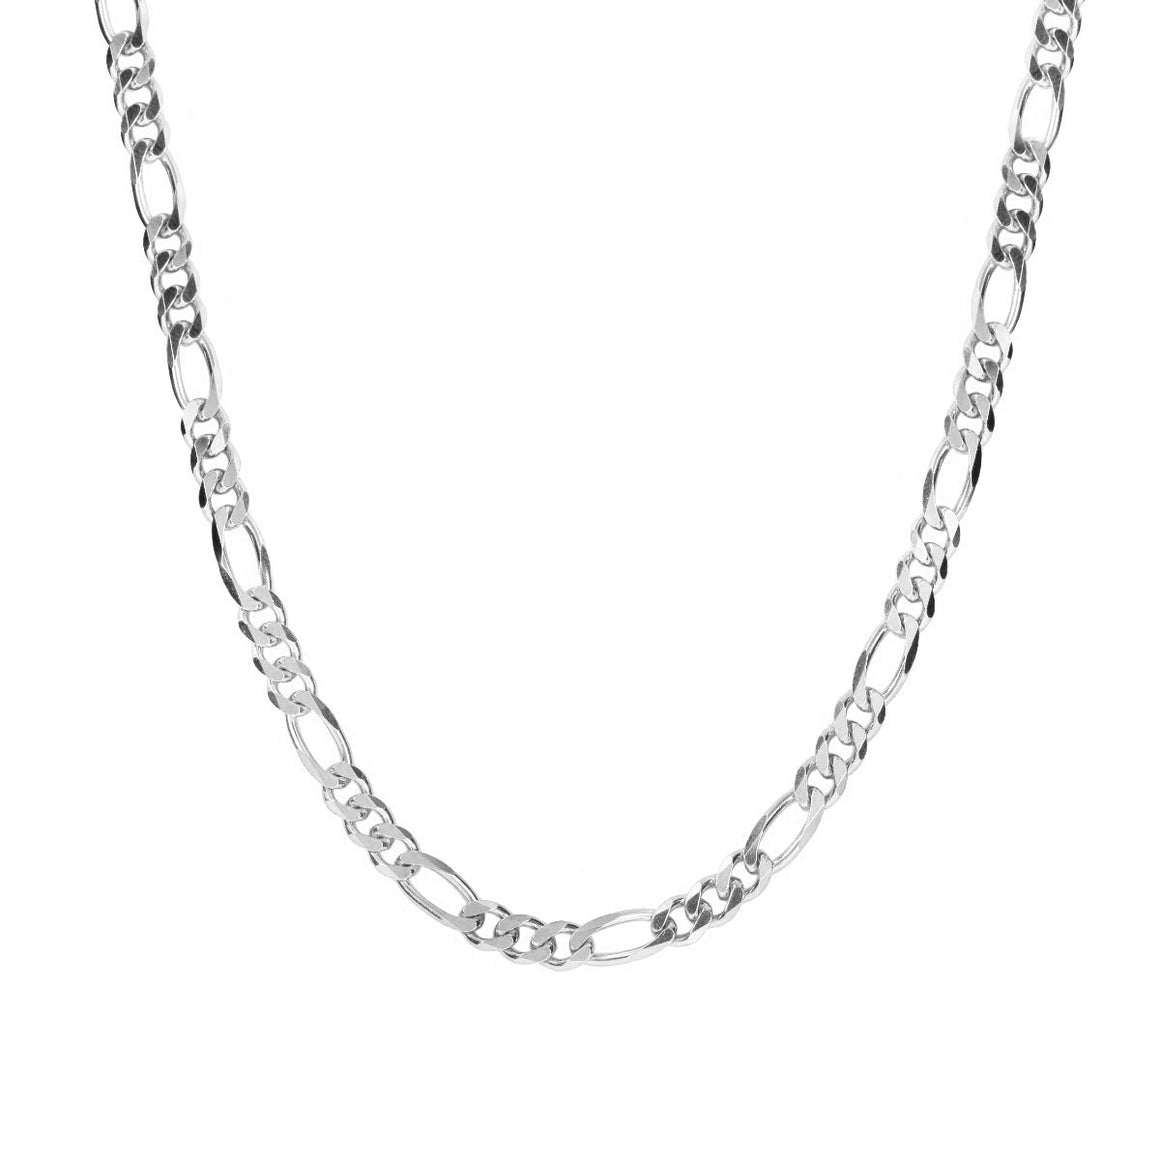 54 FLORAL 10mm FIGARO NECKLACE CHAIN- SILVER